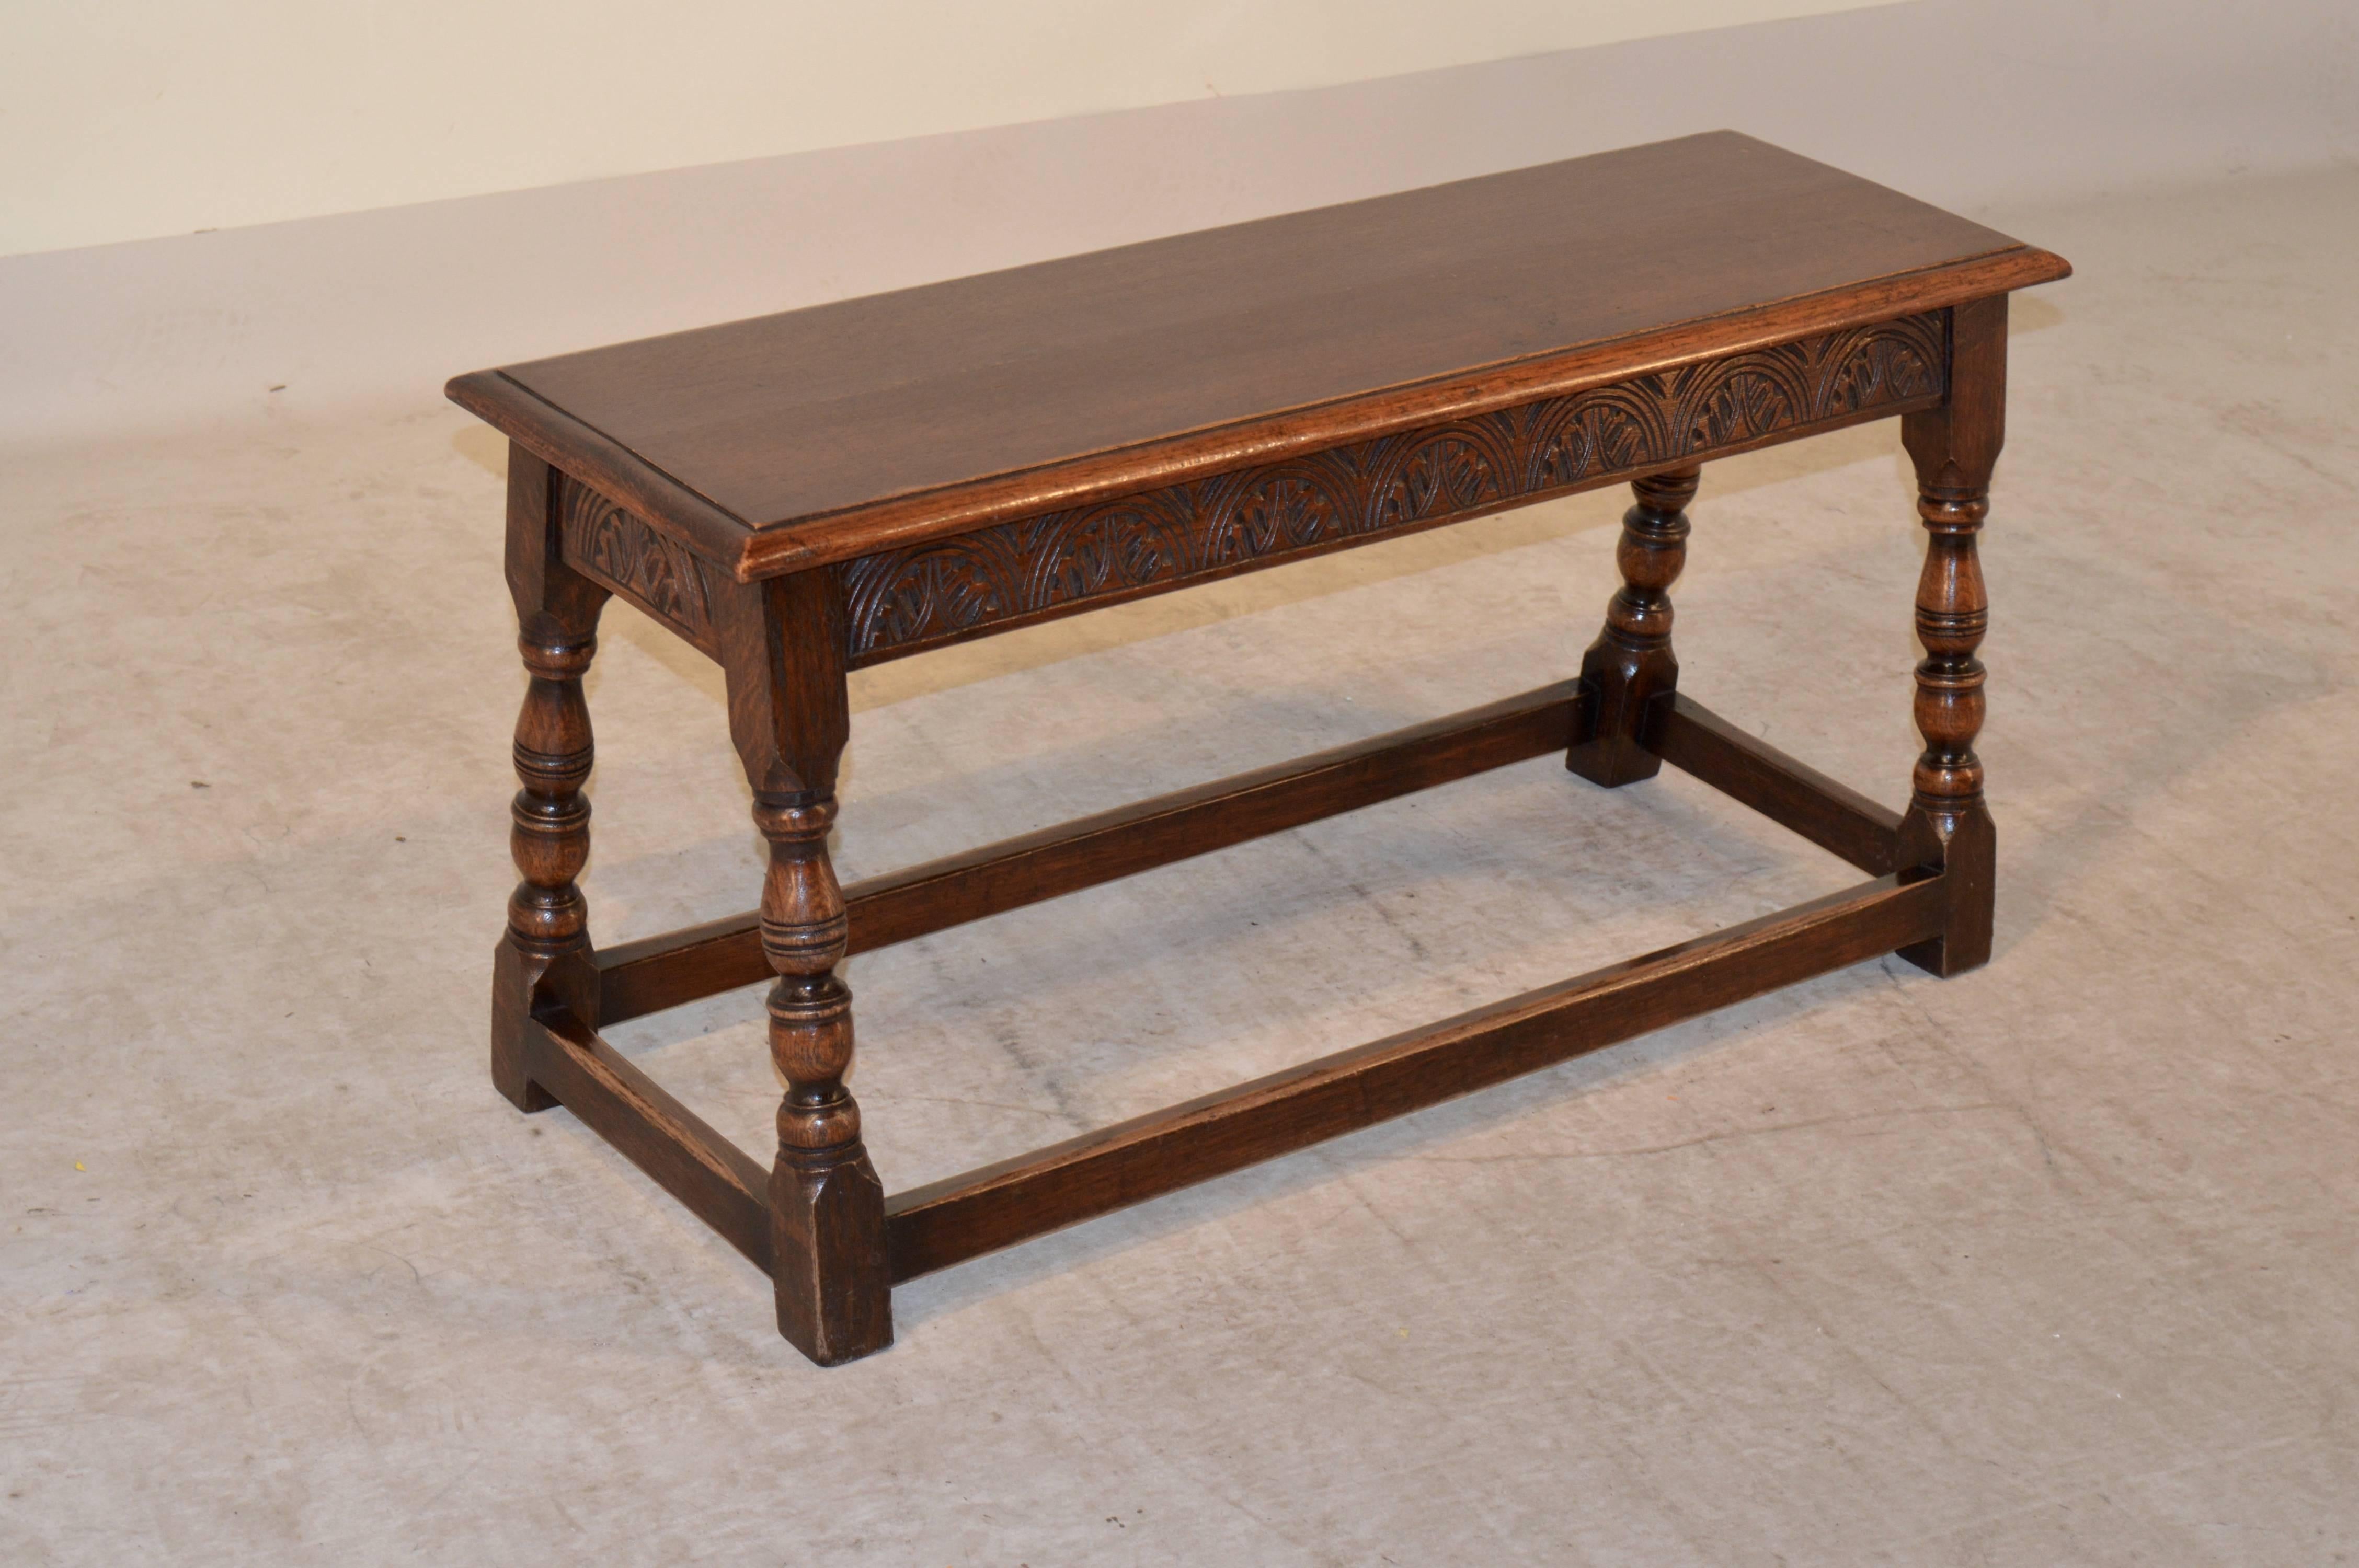 Late 19th century English oak joint bench with a beveled edge around the top following down to a carved decorated apron and hand-turned splayed legs, which are joined by stretchers.